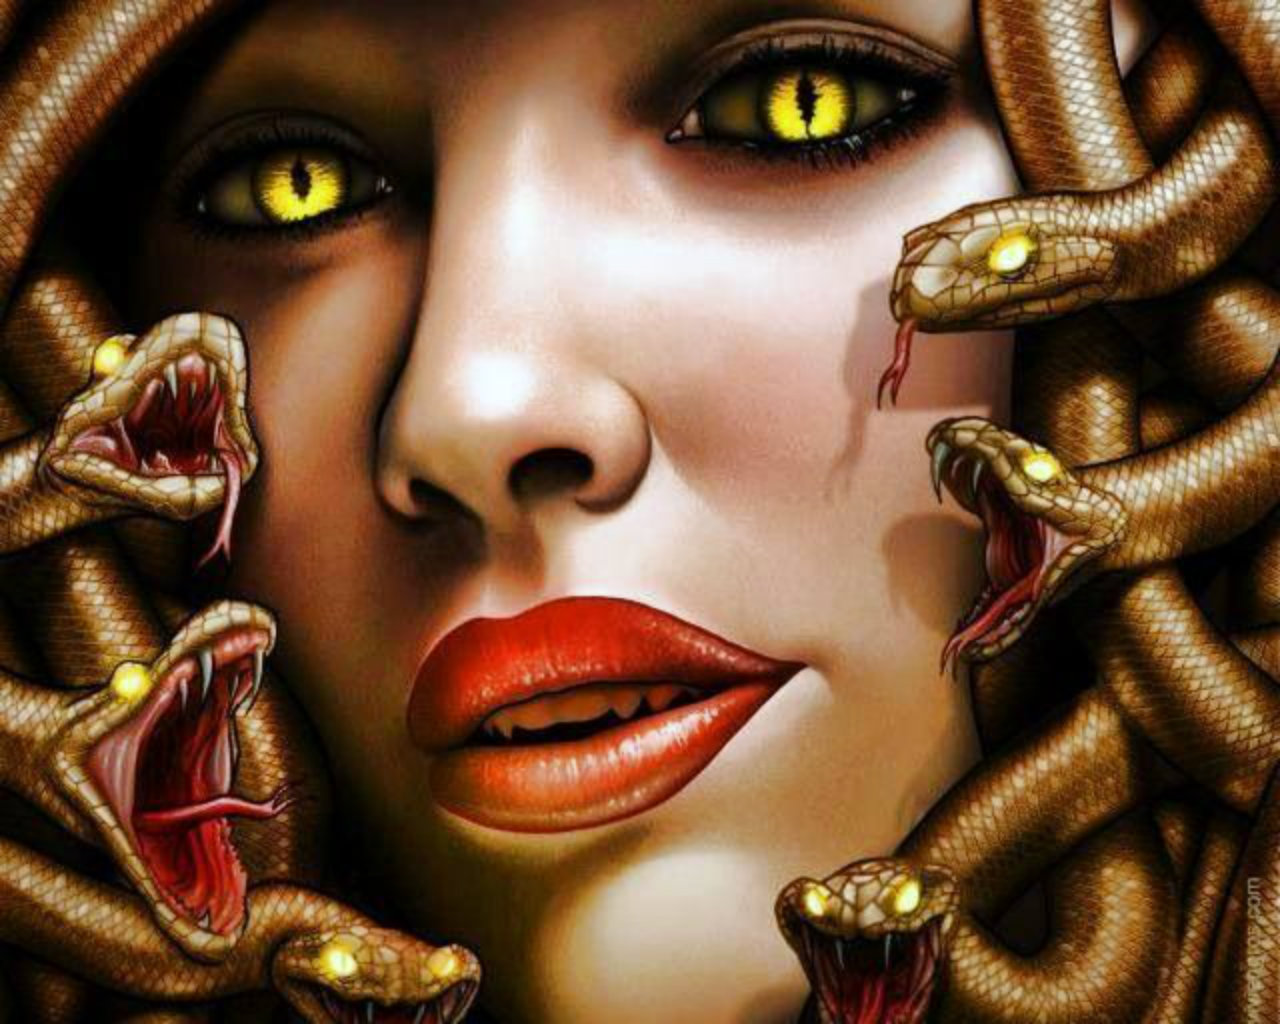 Fantasy images Medusa HD wallpaper and background photos 38005492 1280x1024